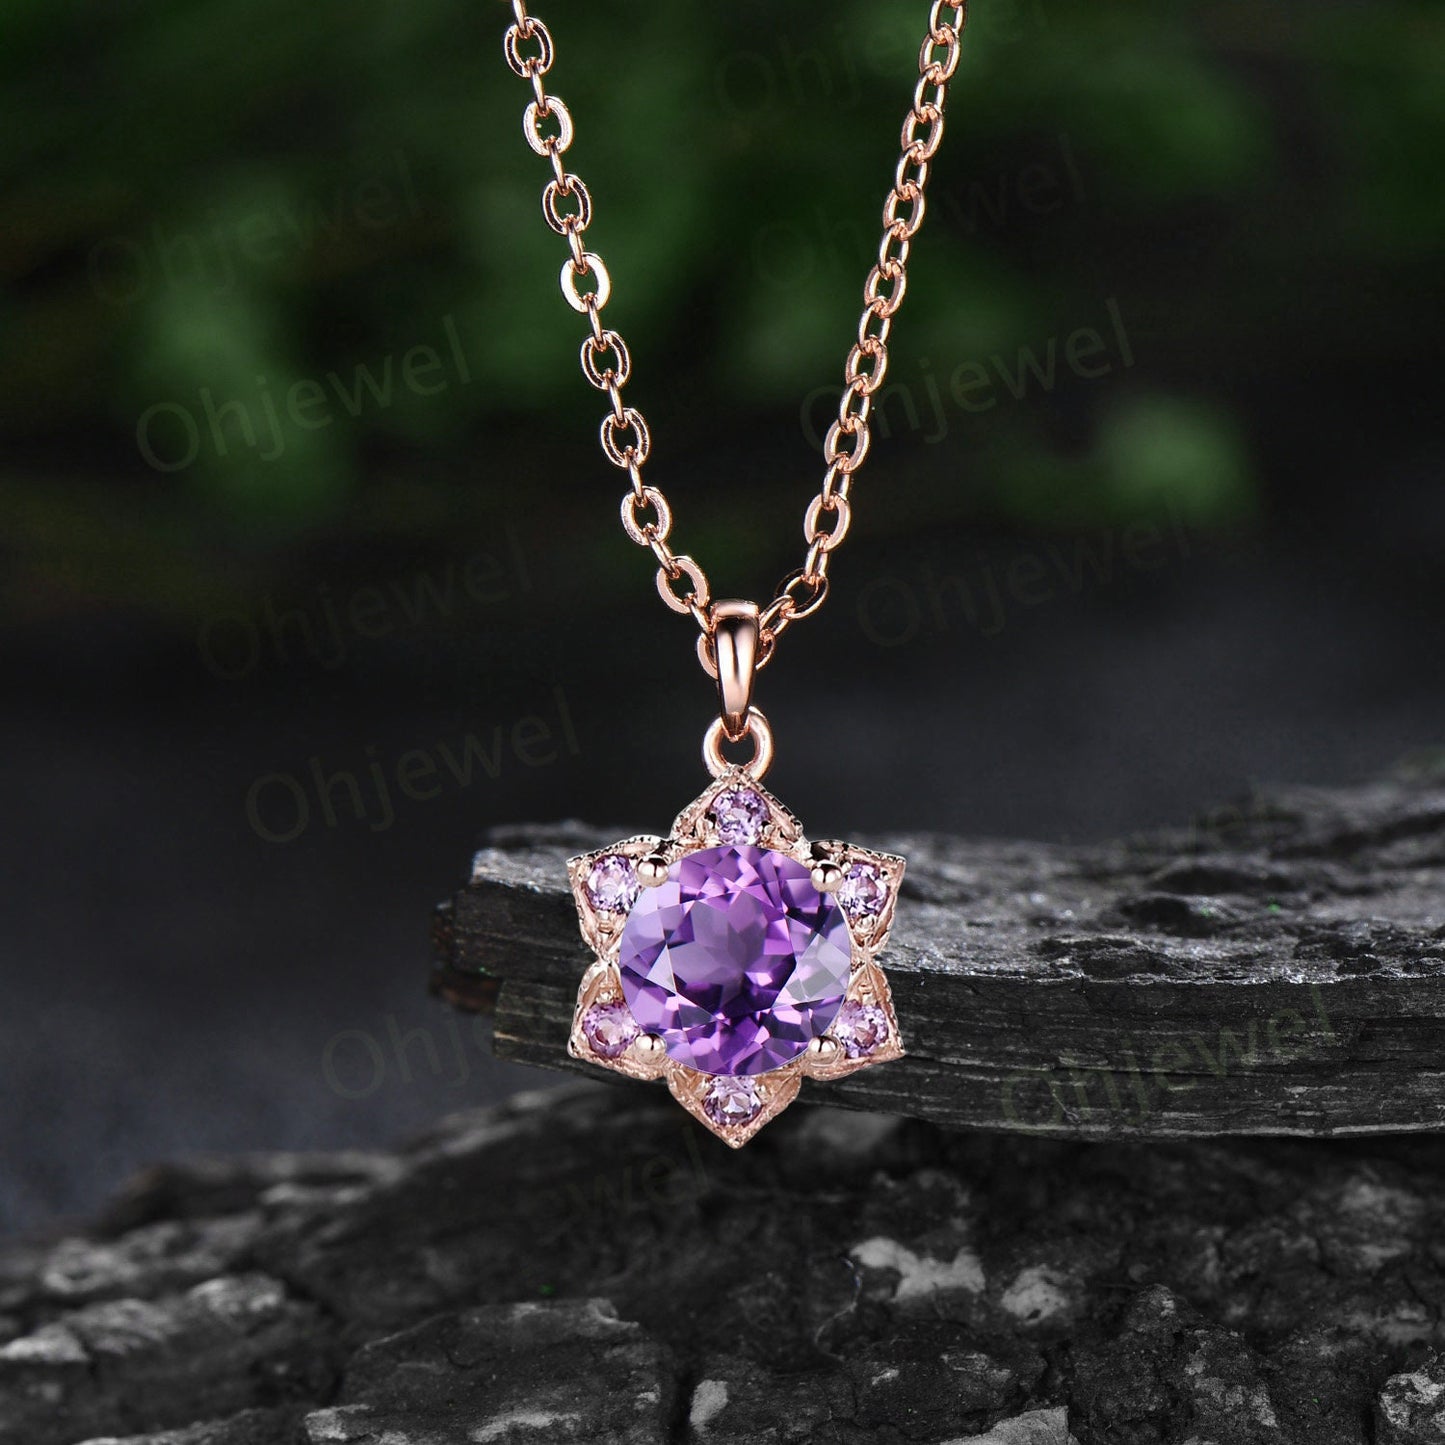 Vintage round purple amethyst necklace art deco milgrain floral unique Pendant women solid 14k rose gold crystal anniversary gift for her